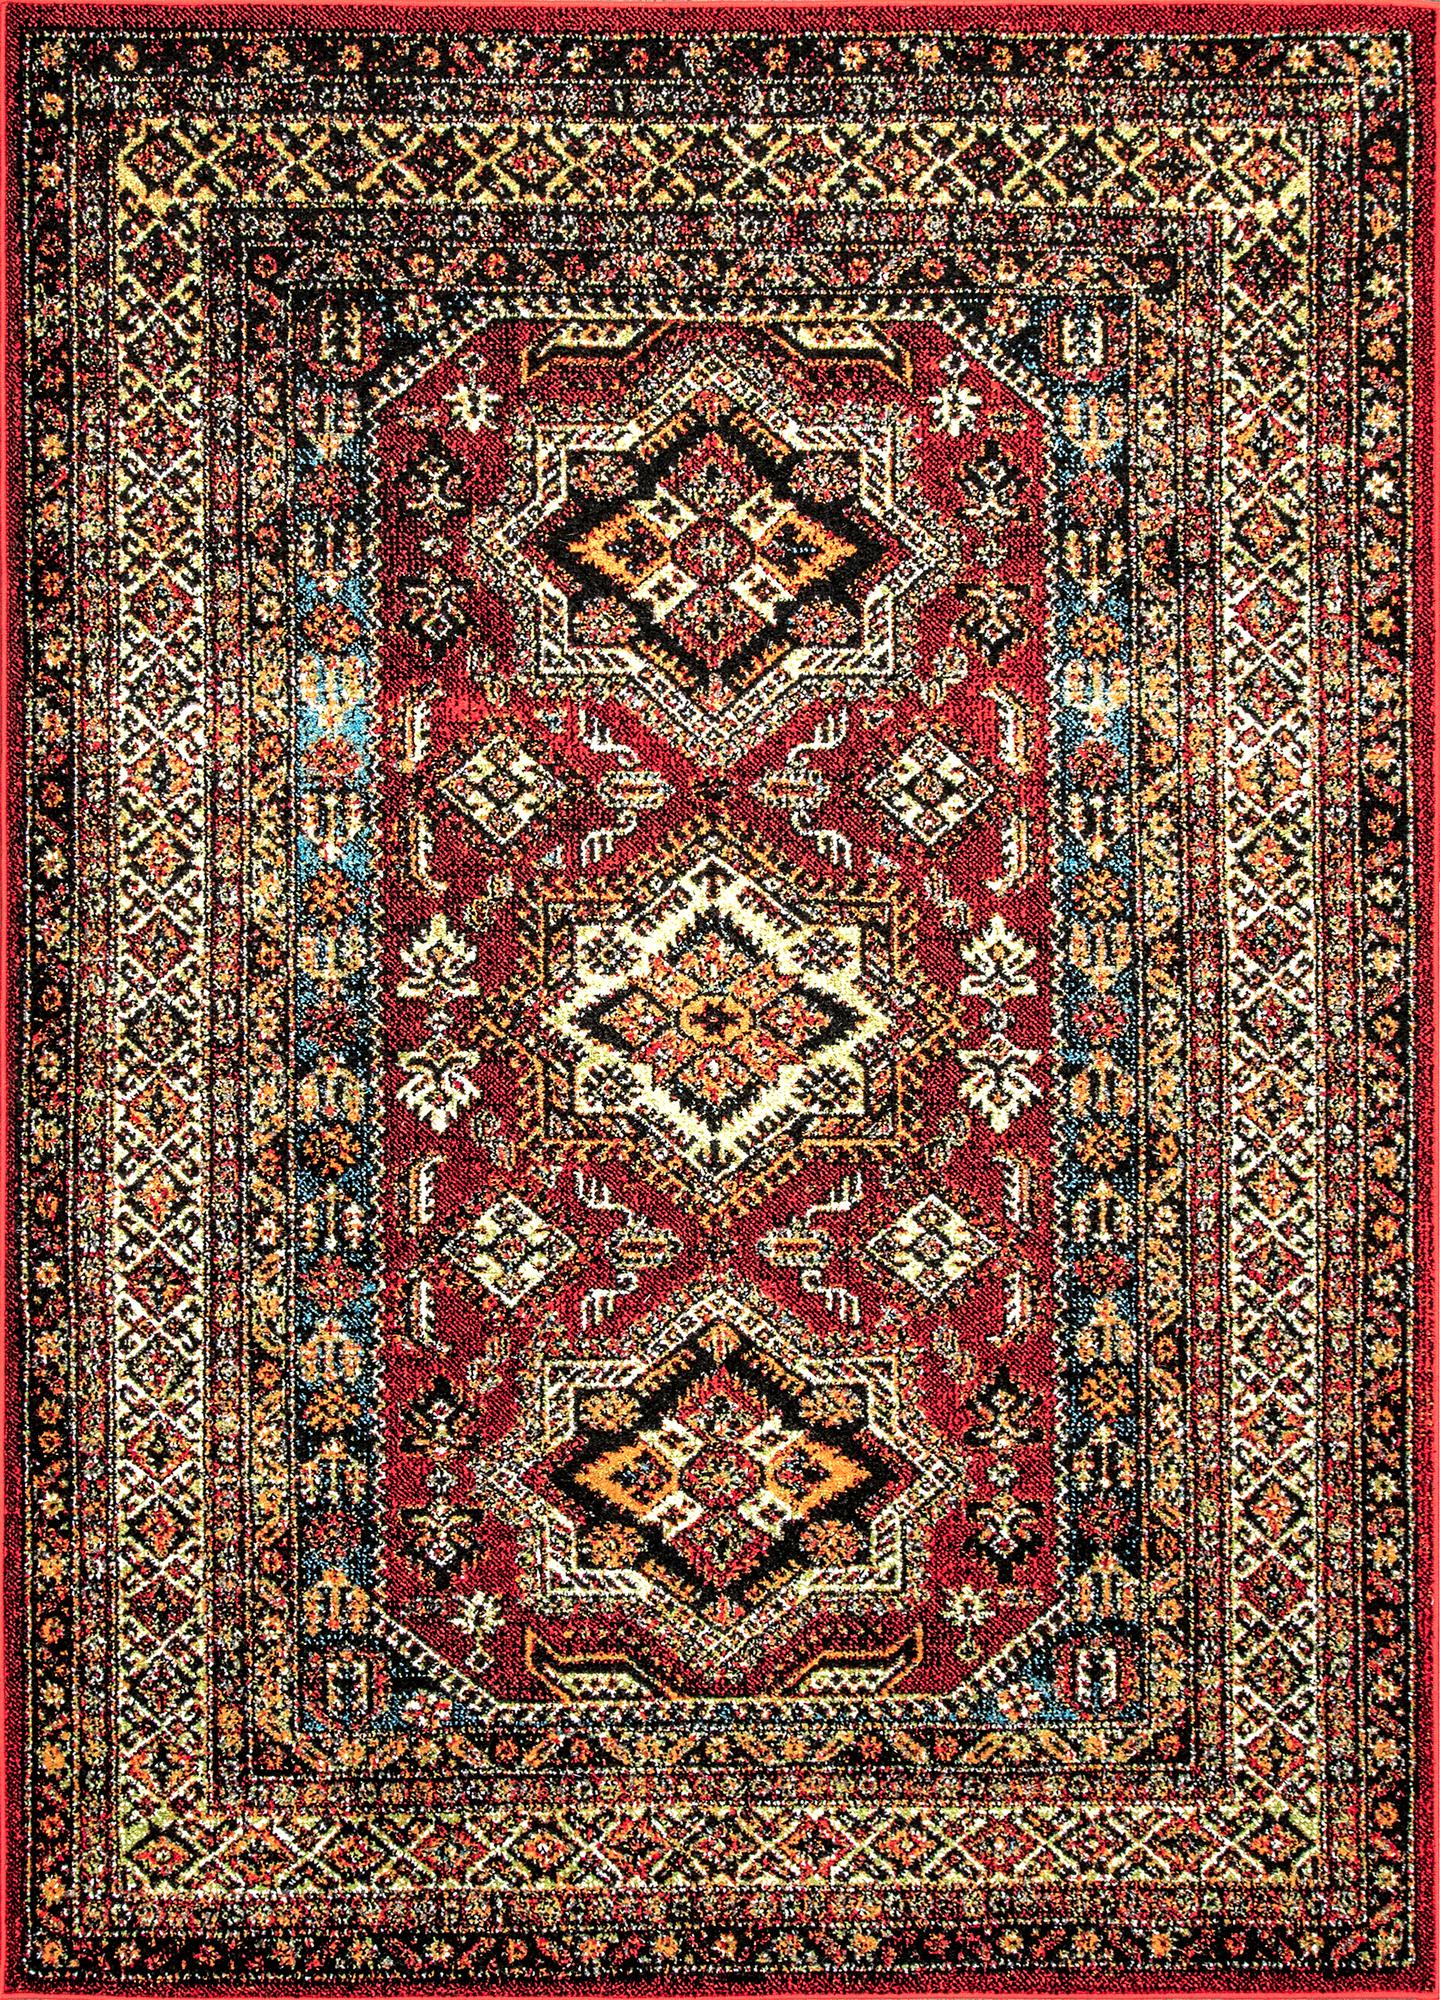 Indoor/Outdoor Transitional Medieval Randy Area Rug - image 2 of 2